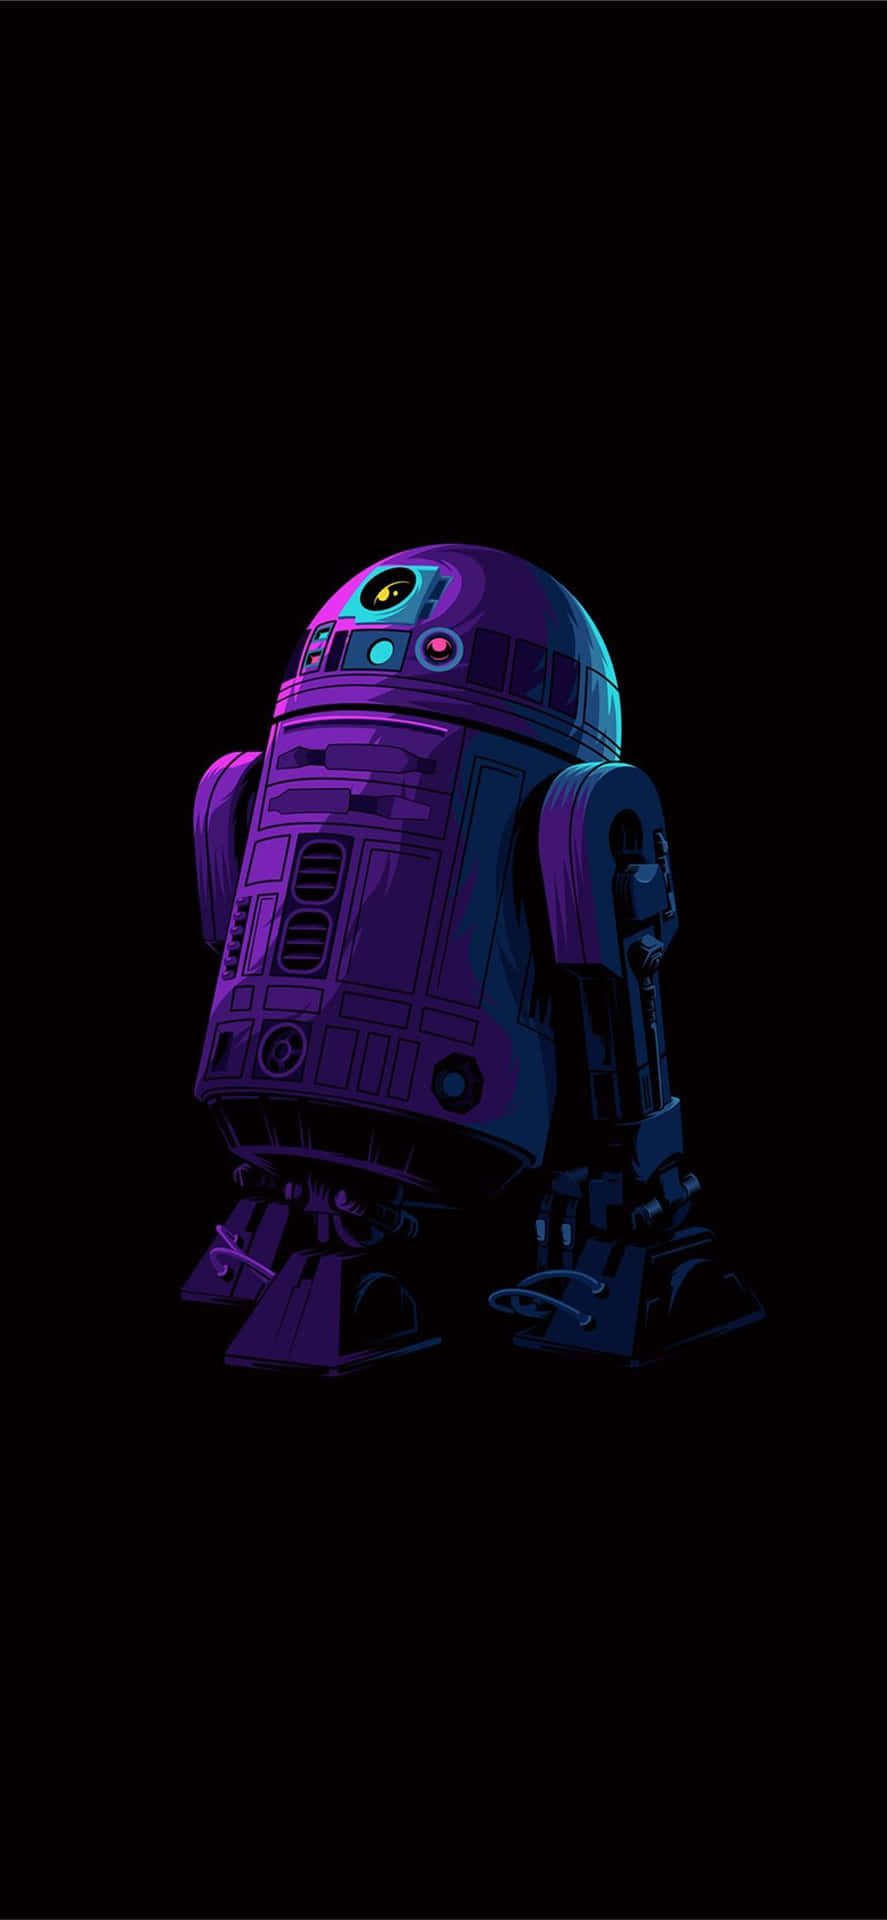 A Star Wars R2d2 On A Black Background Wallpaper